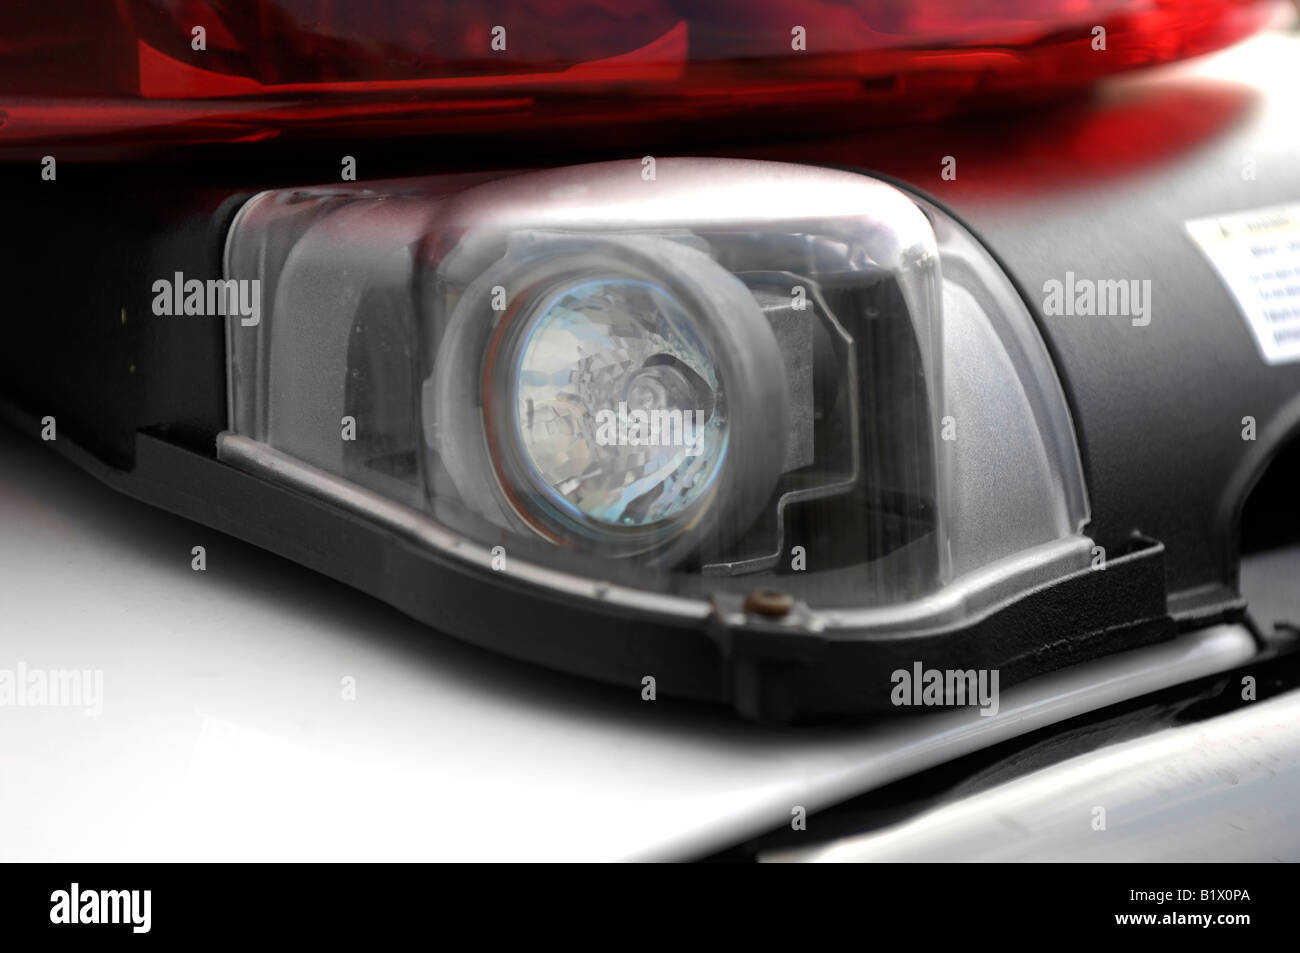 Emergency services vehicle LED siren lights police law enforcement first responder Stock Photo